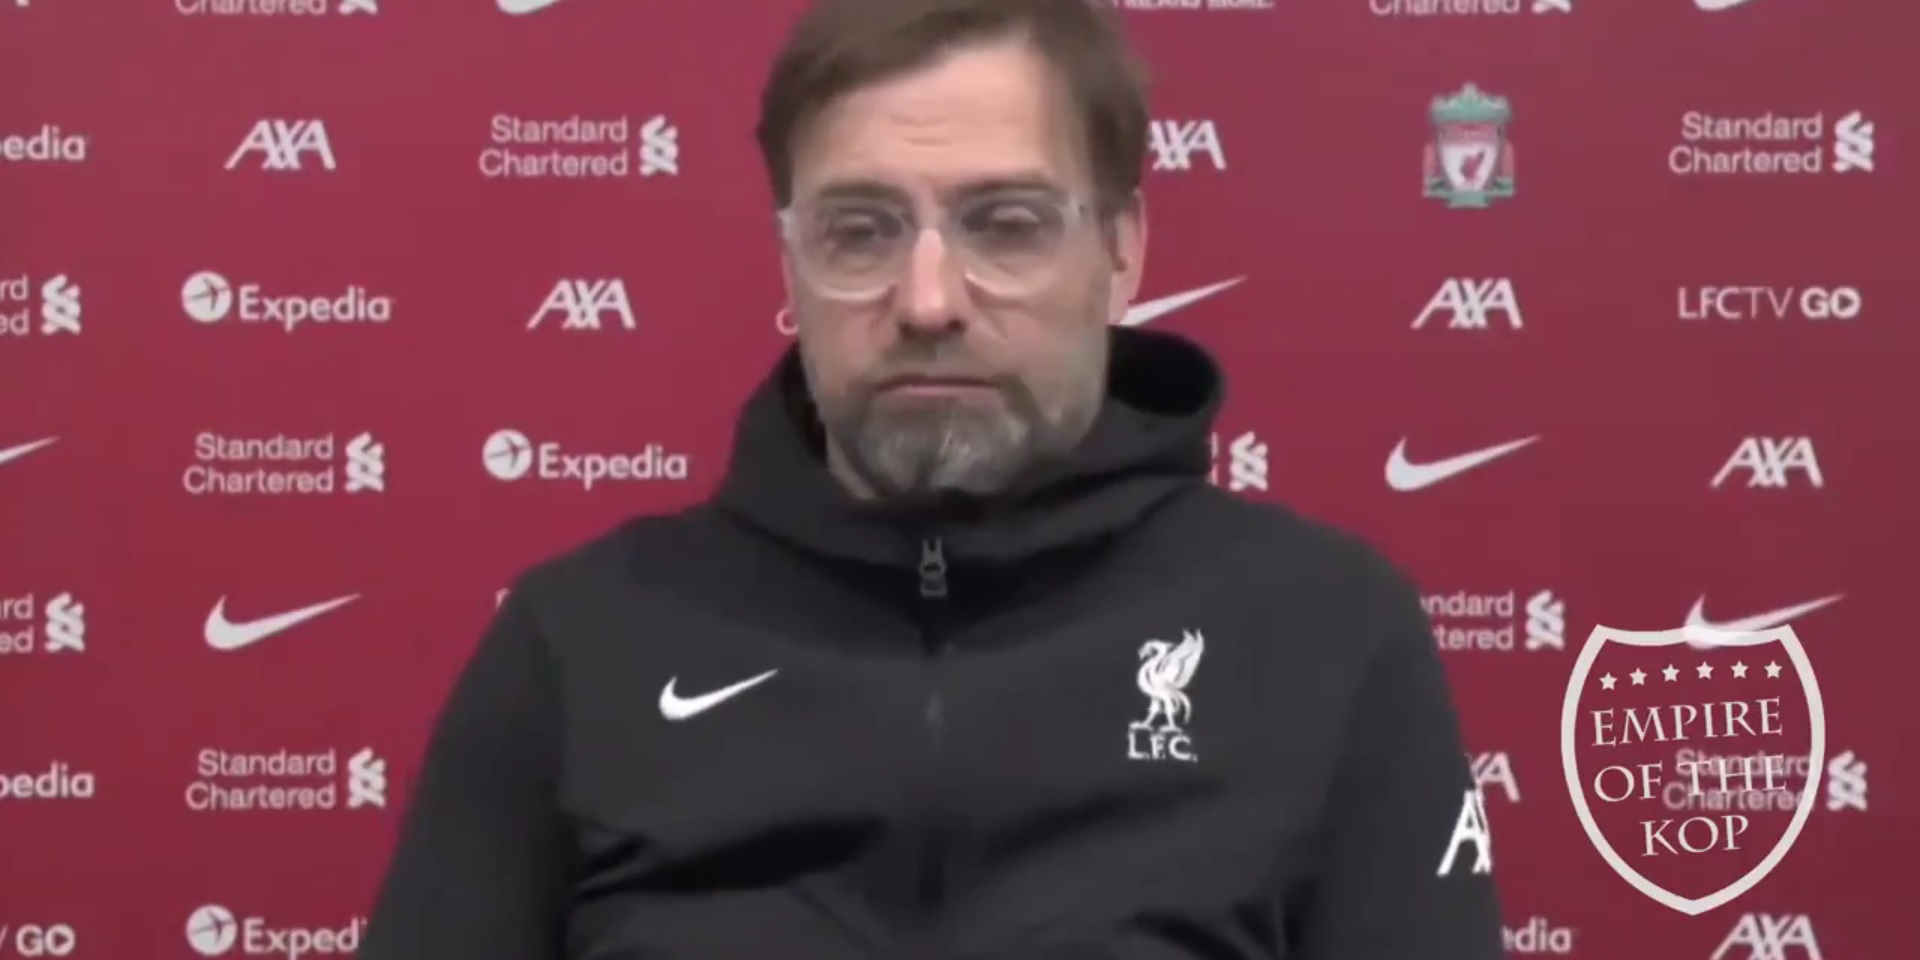 (Video) Jurgen Klopp clears up Liverpool ‘mental fatigue’ comments: “We were not fresh enough, not depressed”